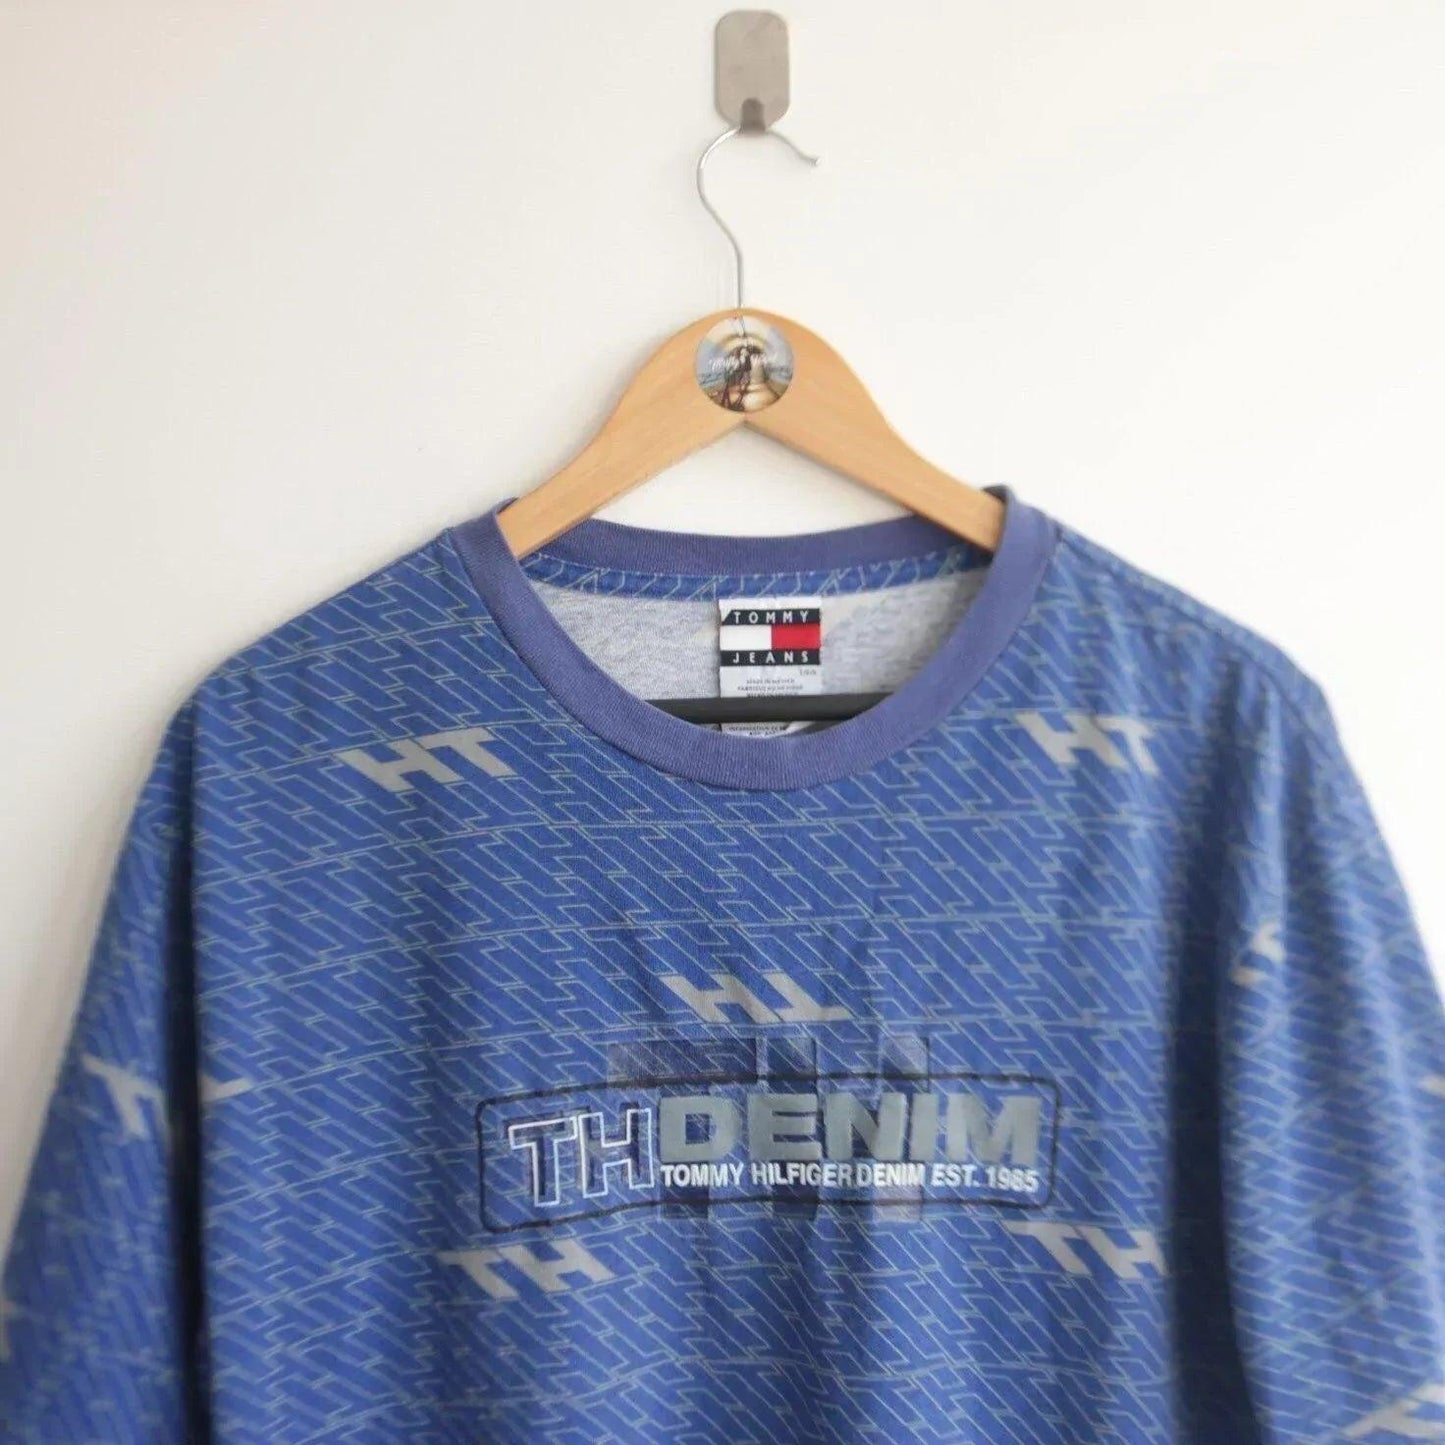 Vintage Tommy Hilfiger All over 3M Spellout (L) (M) (L) - Known Source